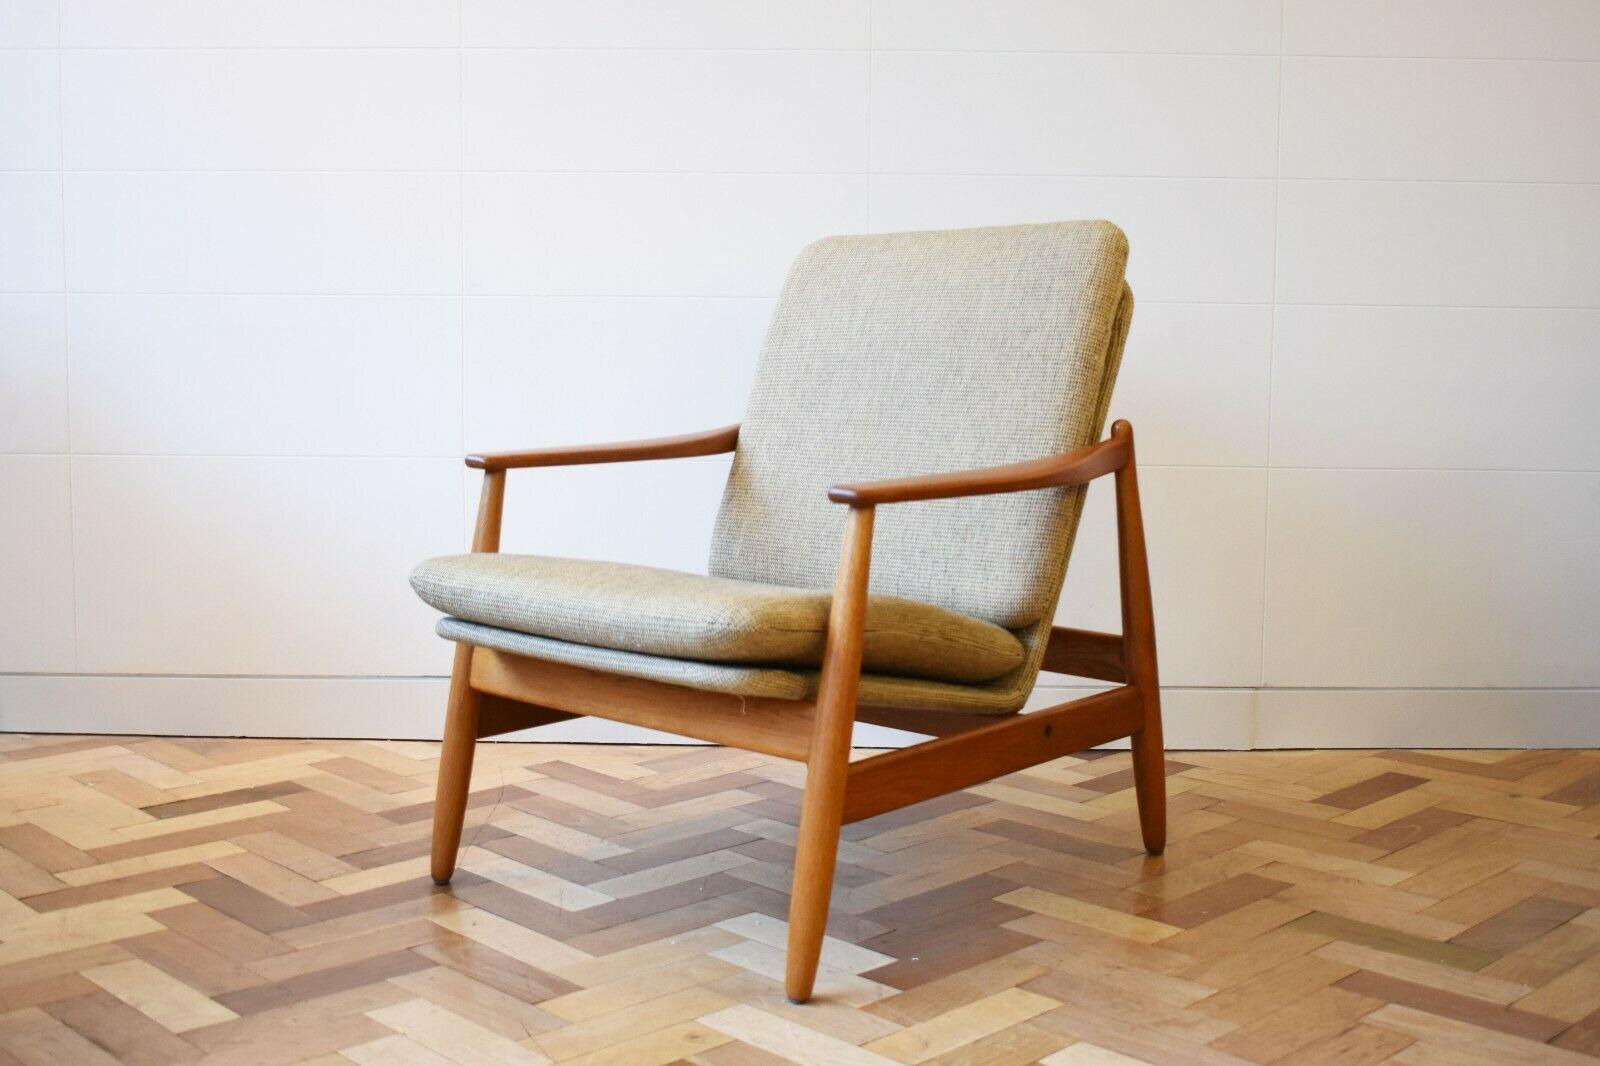 1960s Danish teak 'Easy Chair' Model 350 by Poul Volther for Frem Rojle

This 1960s armchair, designed by Poul Volther, features its original wool upholstered cushions that sit within a teakwood frame. 

A classic staple piece that encapsulates